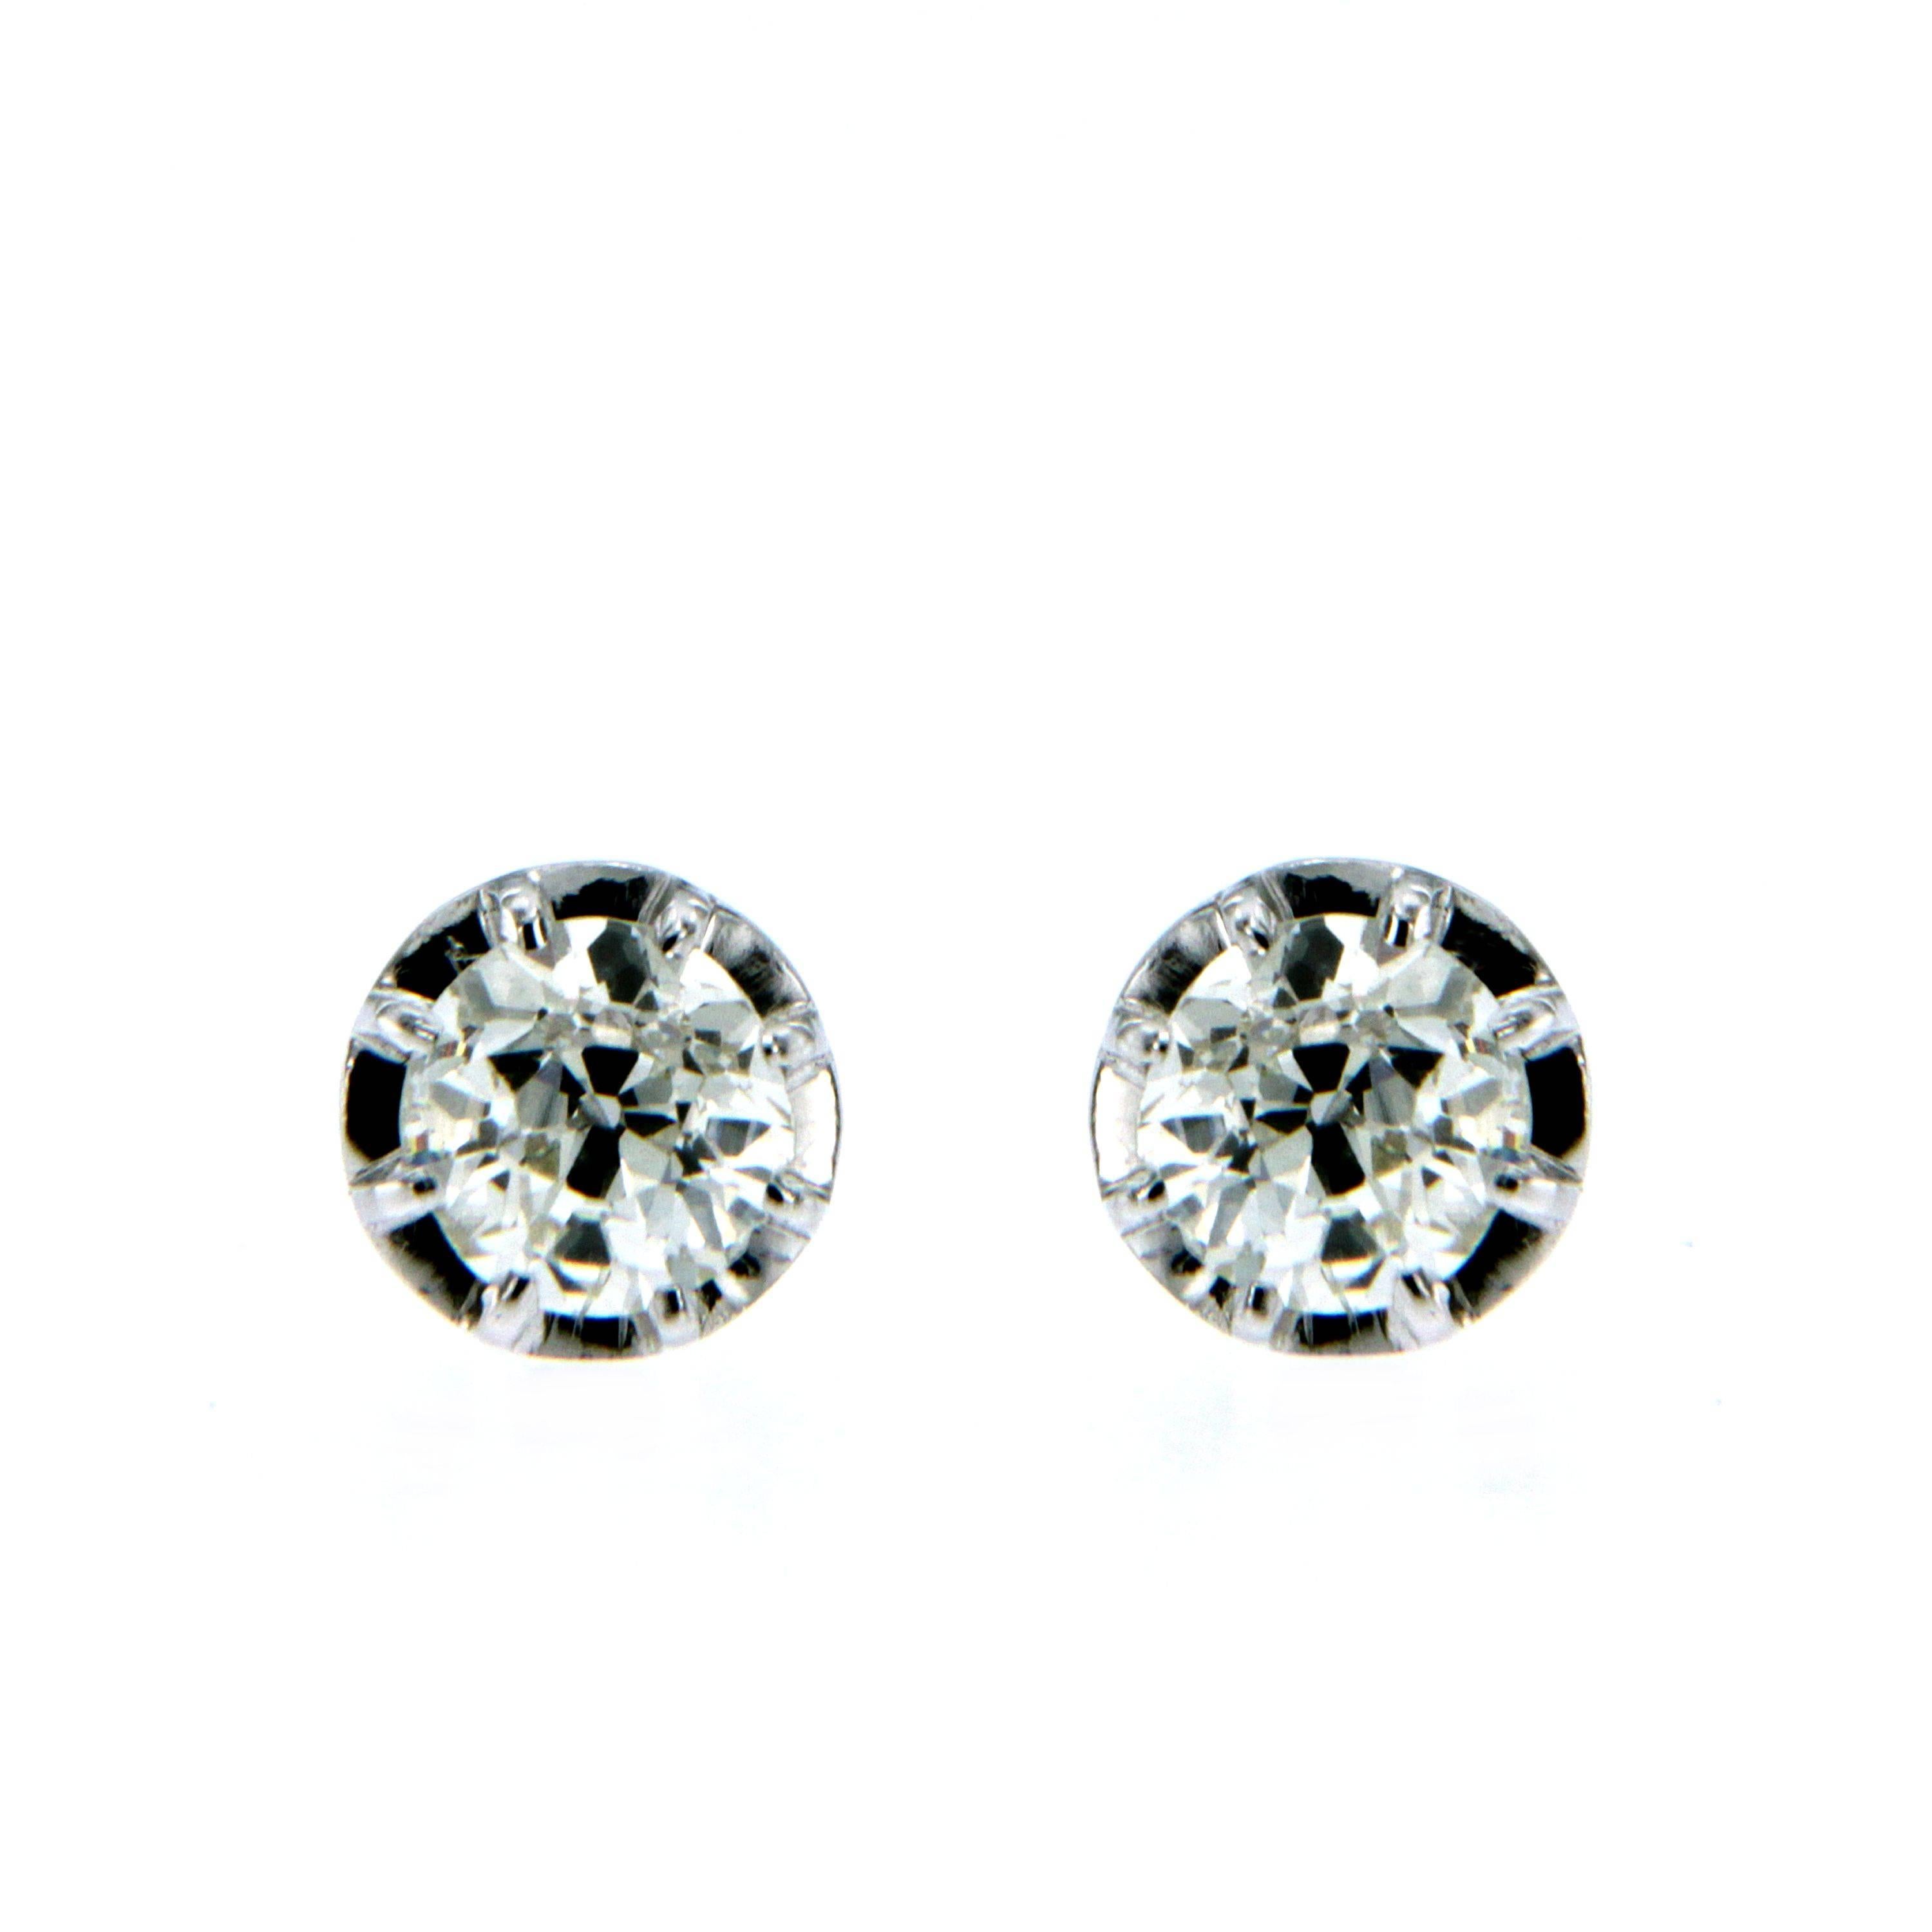 One pair of round diamond stud earrings weighing 0.80 carats H color VS, mounted in 18k white gold with 8 prongs. 
This setting sits perfectly and most comfortably on the ear.  The two diamonds are perfectly matched by our experience